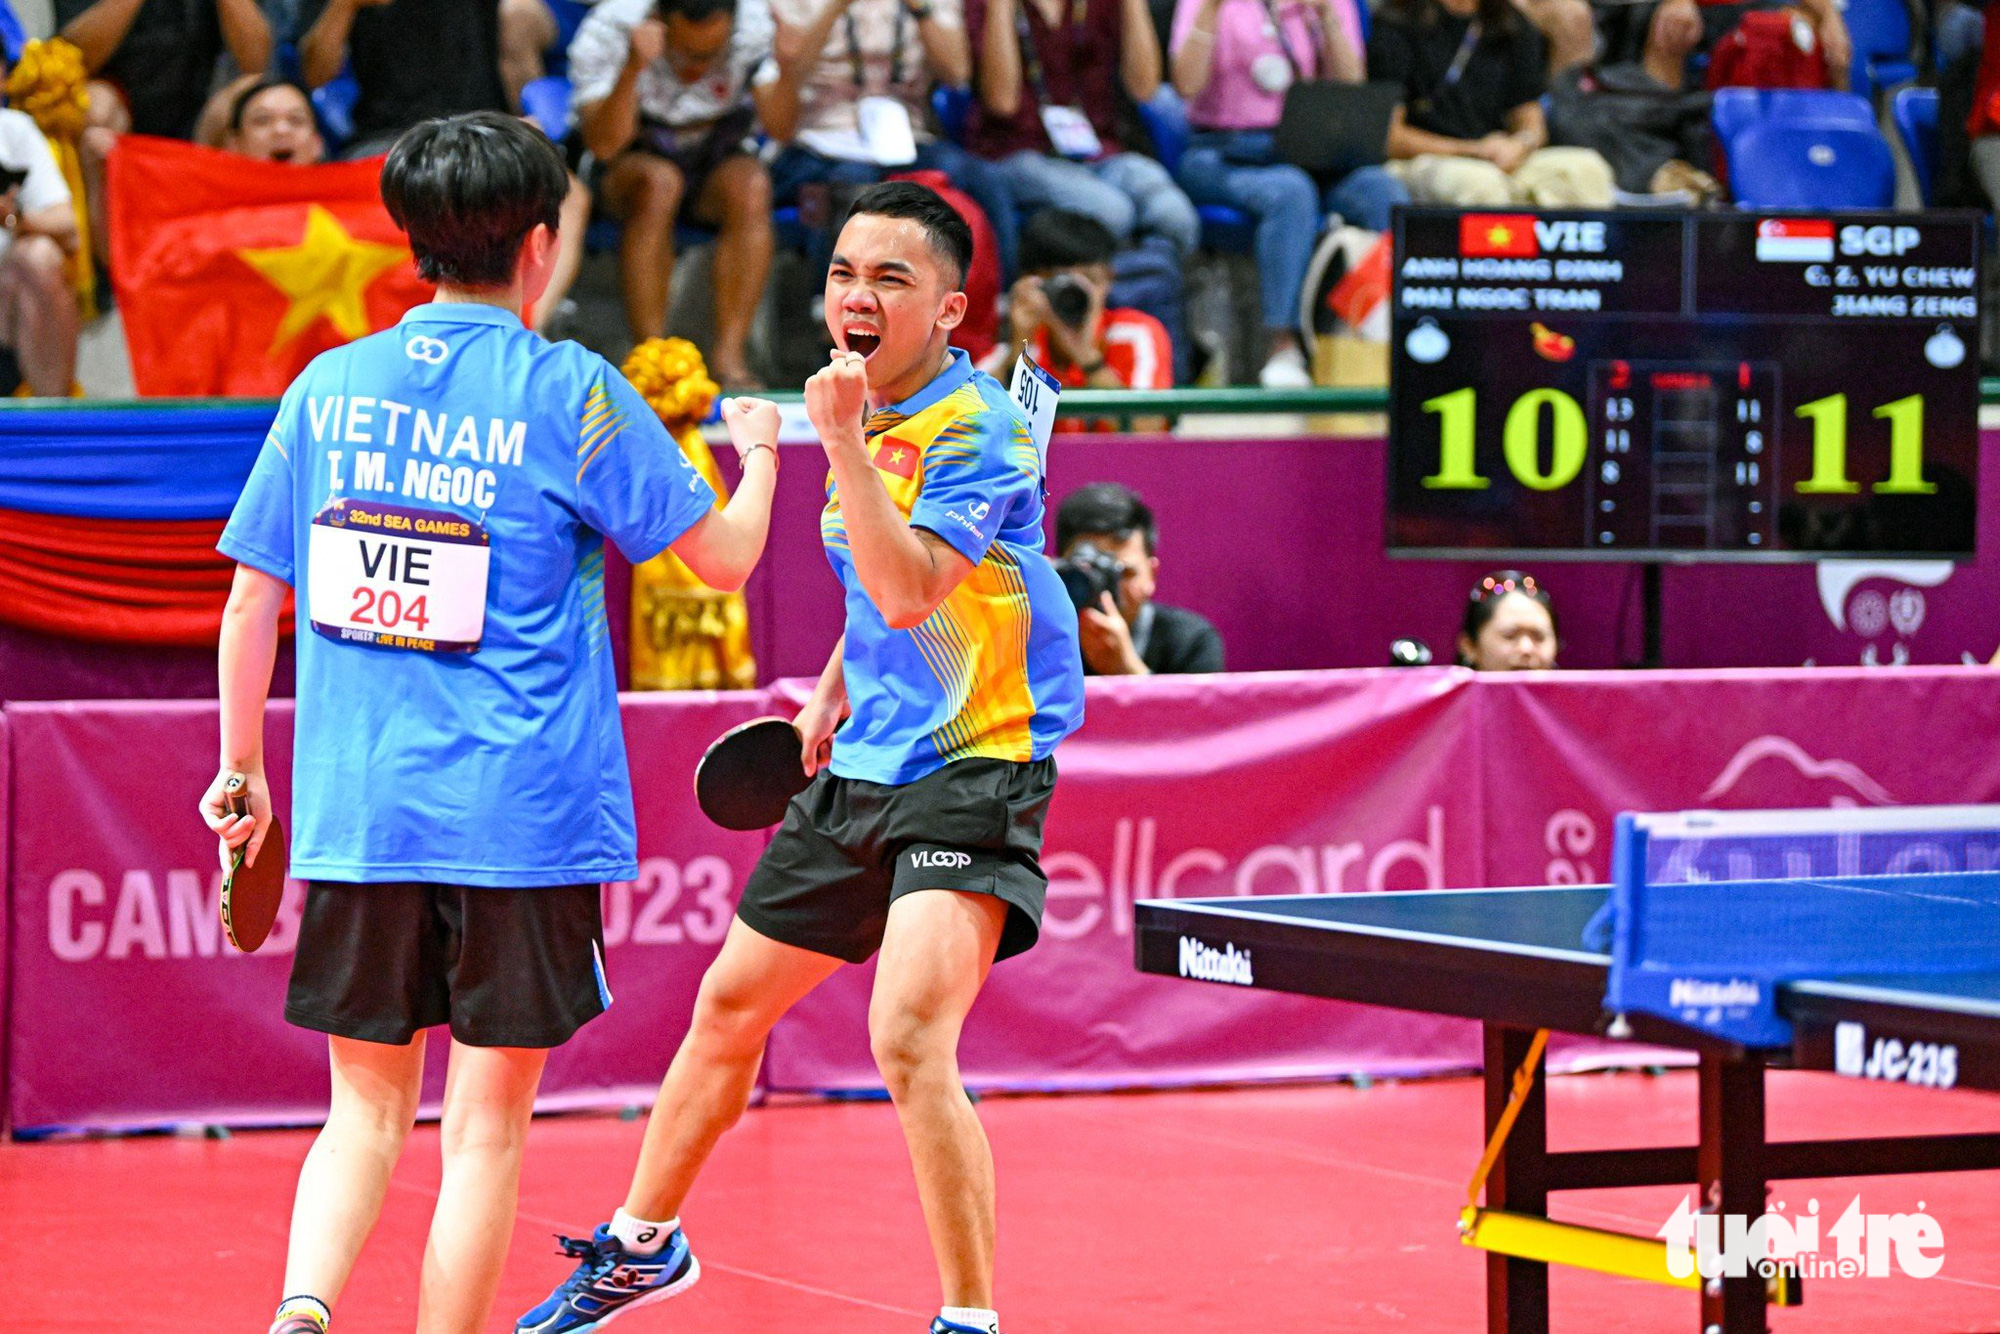 Vietnamese duo Dinh Anh Hoang (R) and Tran Mai Ngoc celebrate a point in the mixed doubles final of table tennis at the 2023 Southeast Asian (SEA) Games in Cambodia, May 14, 2023. Photo: Nam Tran / Tuoi Tre